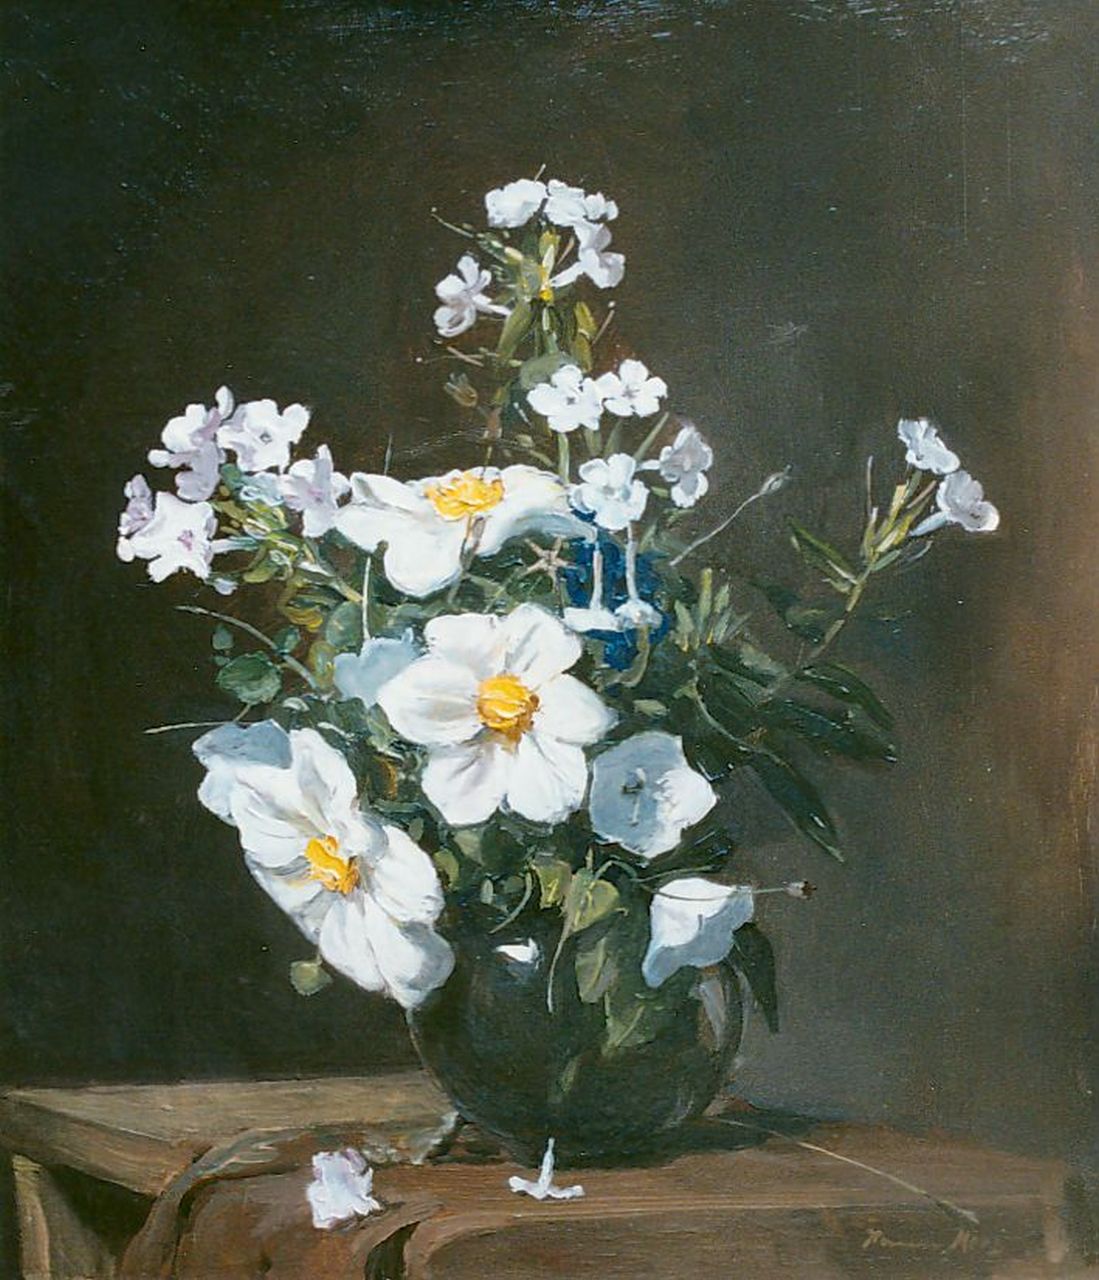 Mees M.A.  | Margaretha Agatha Mees, A flower still life with daisies and poppies, oil on canvas 44.2 x 38.7 cm, signed l.r.